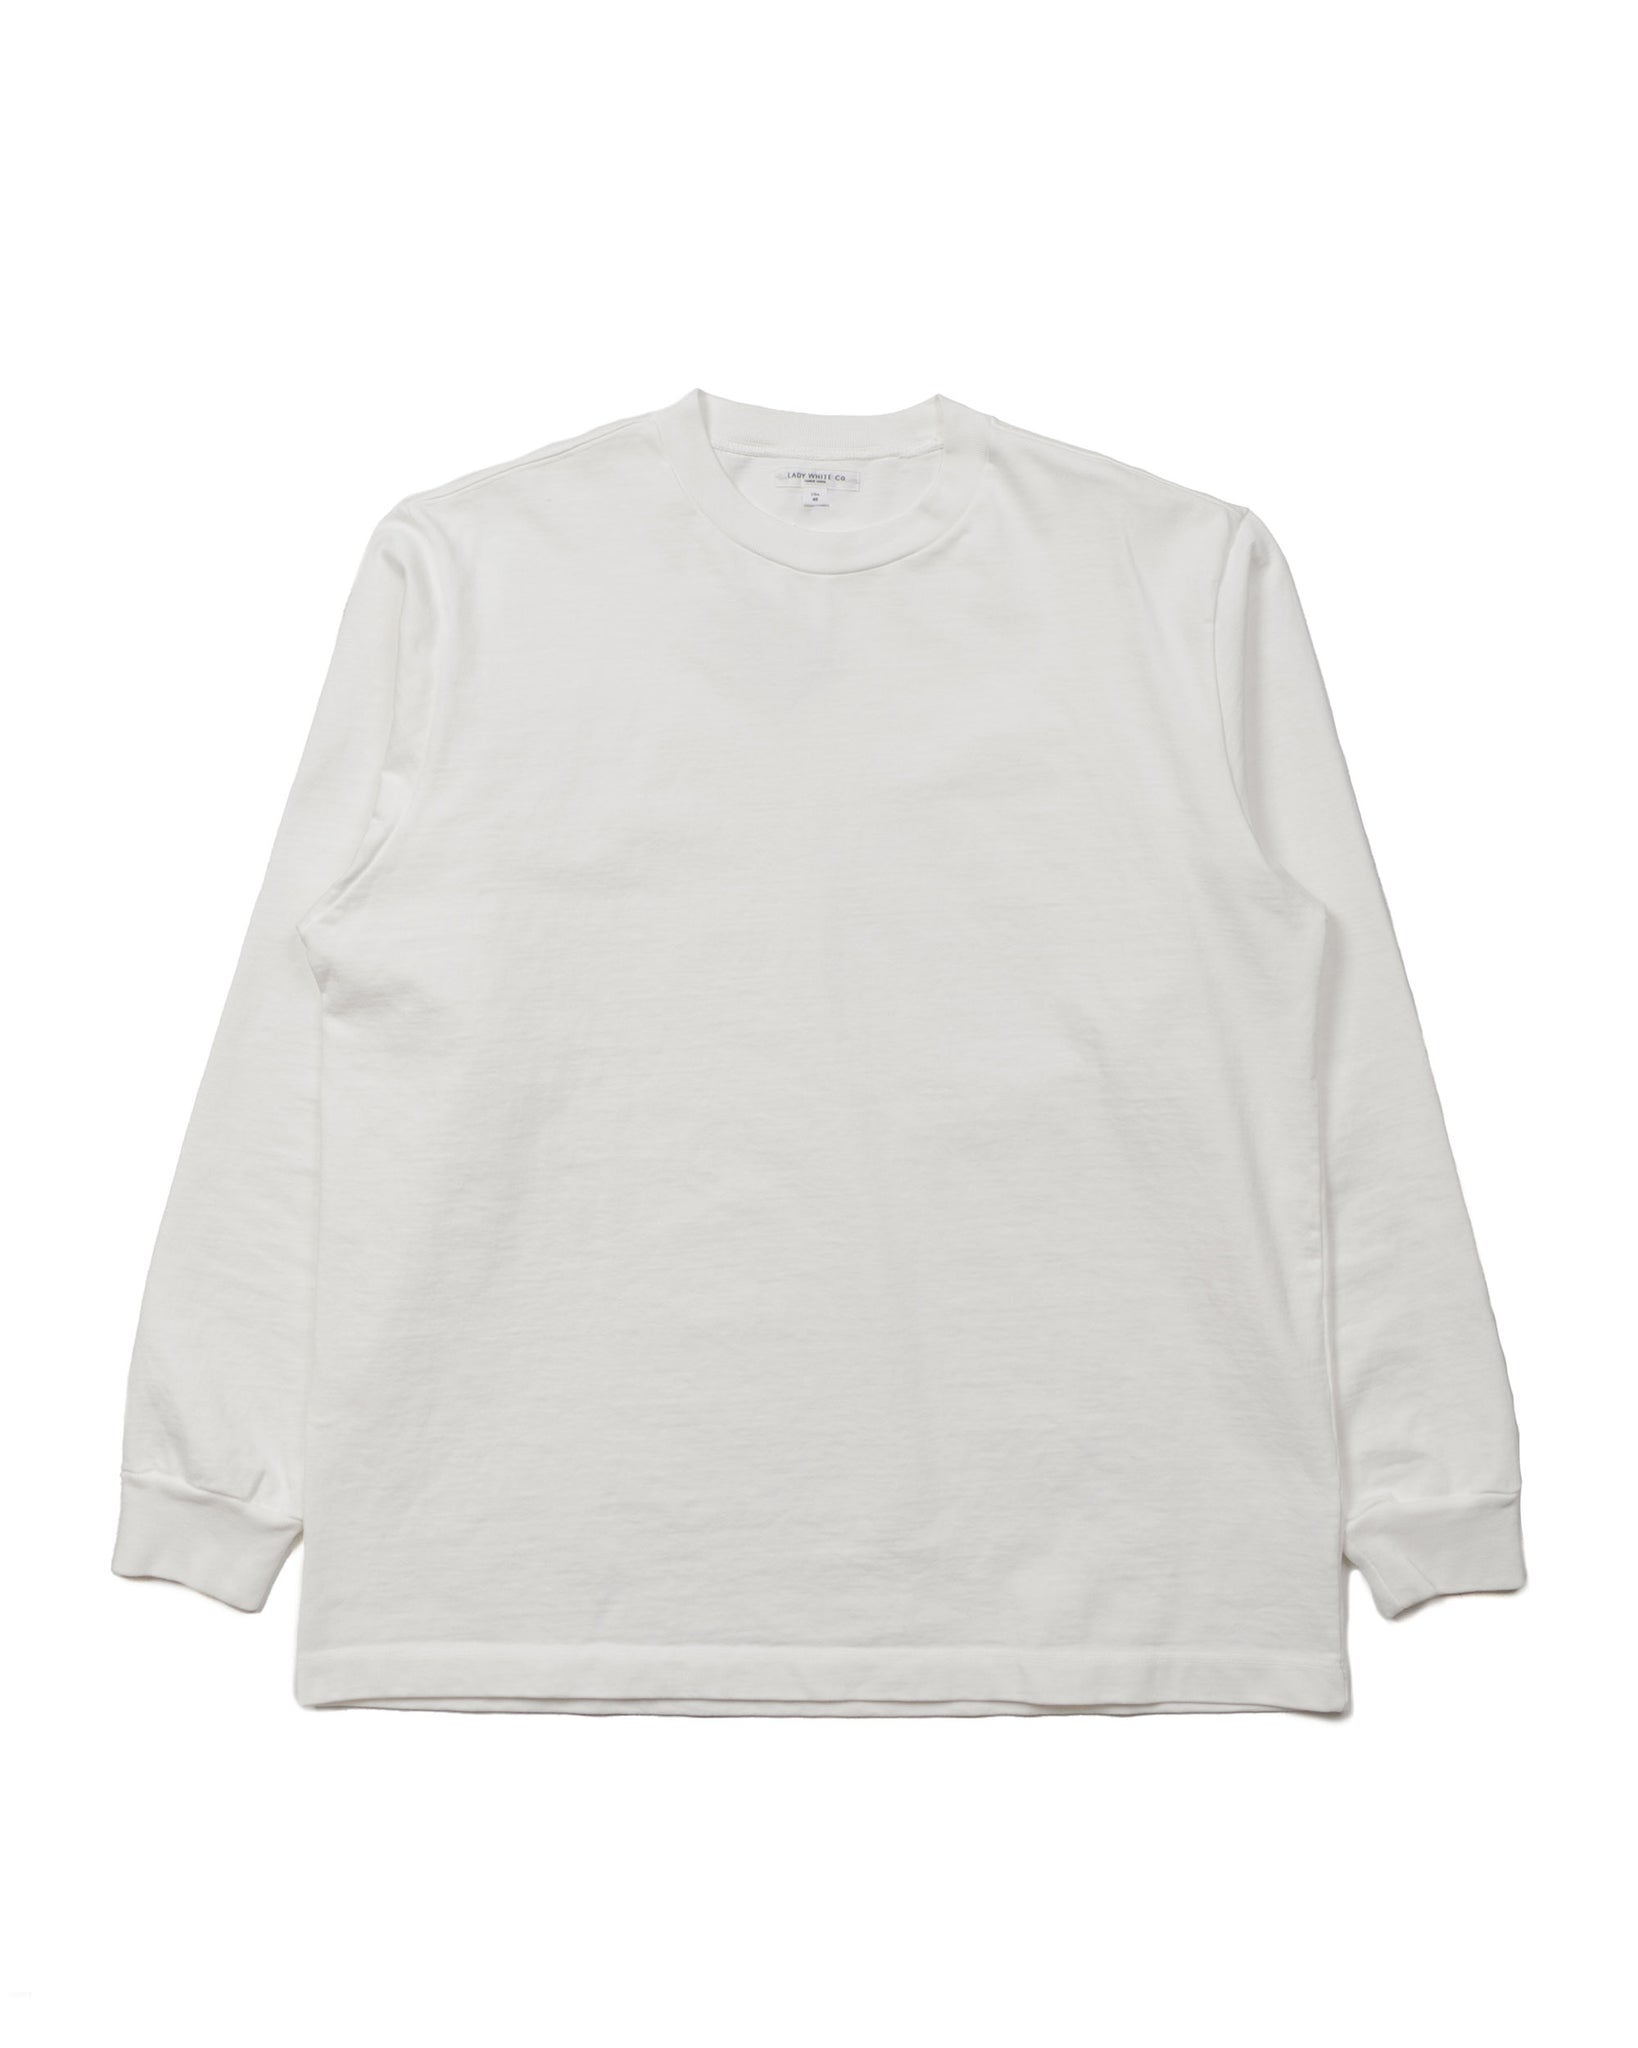 Lady White Co. L/S Rugby T-Shirt White